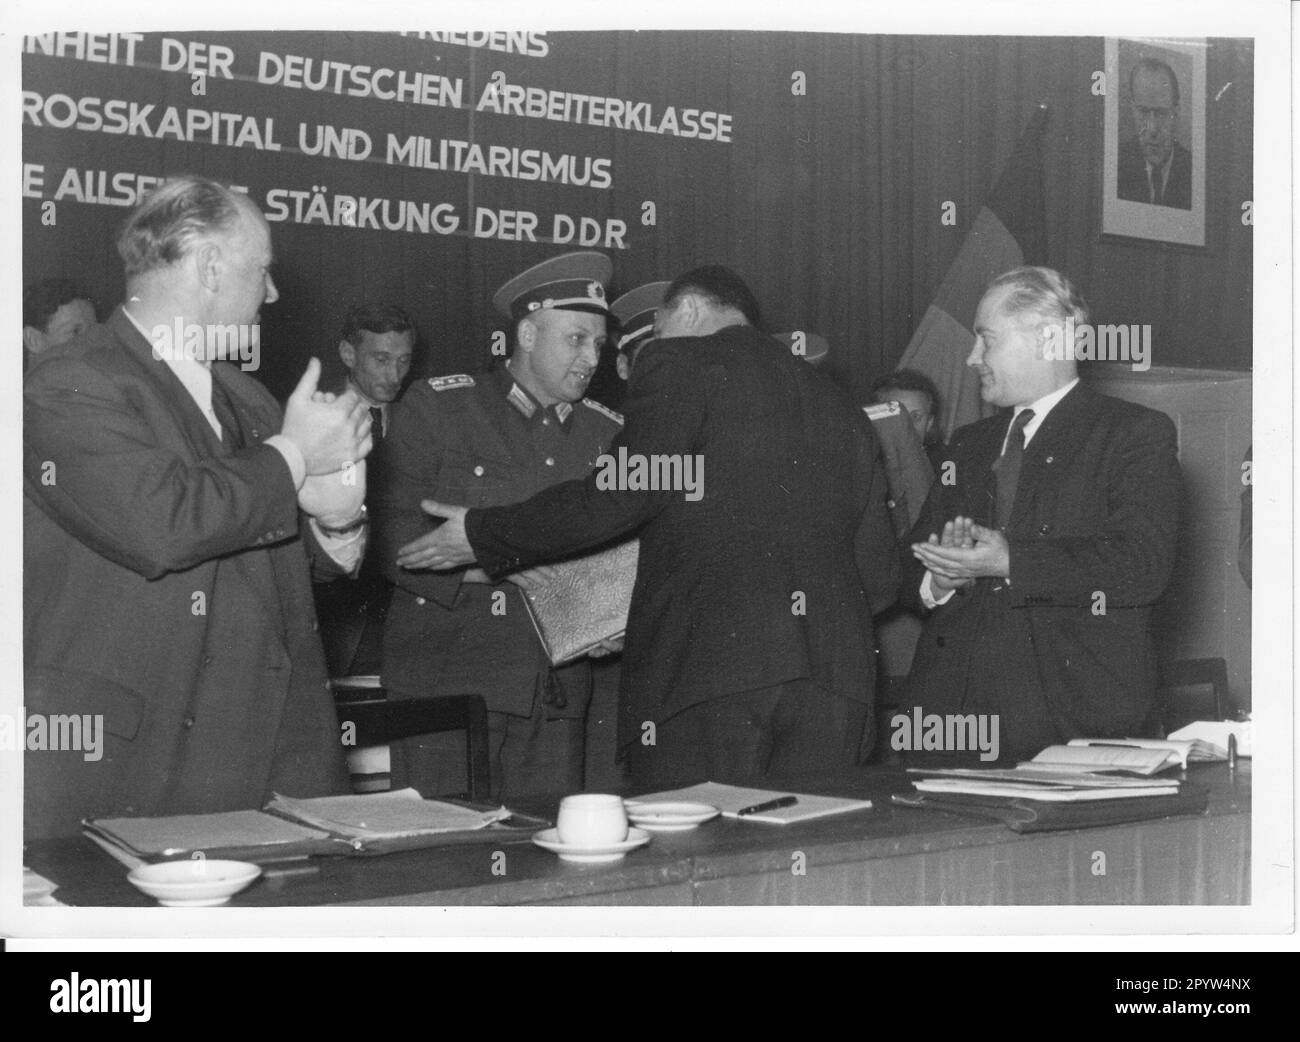 3rd District Delegates Conference of the Free German Trade Union Federation (FDGB) in Potsdam. Trade union. Organization. Conference Assembly. Historical. GDR. Photo MAZ/Archive, March 1957 [automated translation] Stock Photo